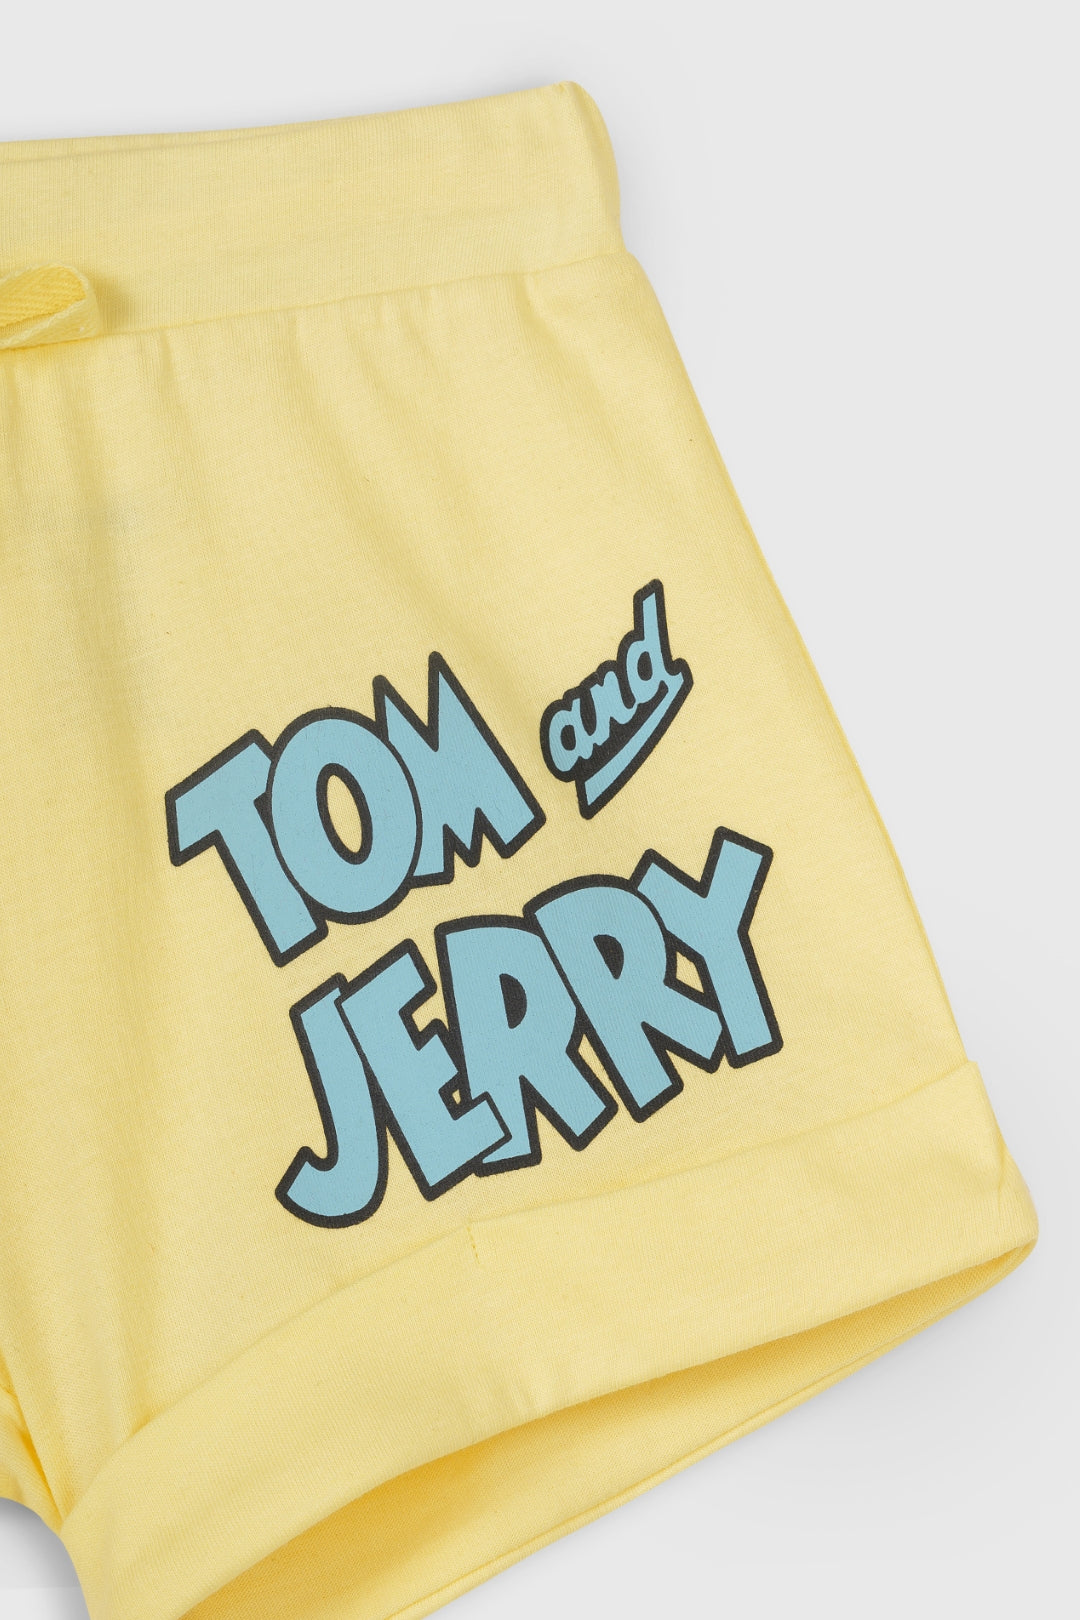 Tom and Jerry Blue classic Short Set